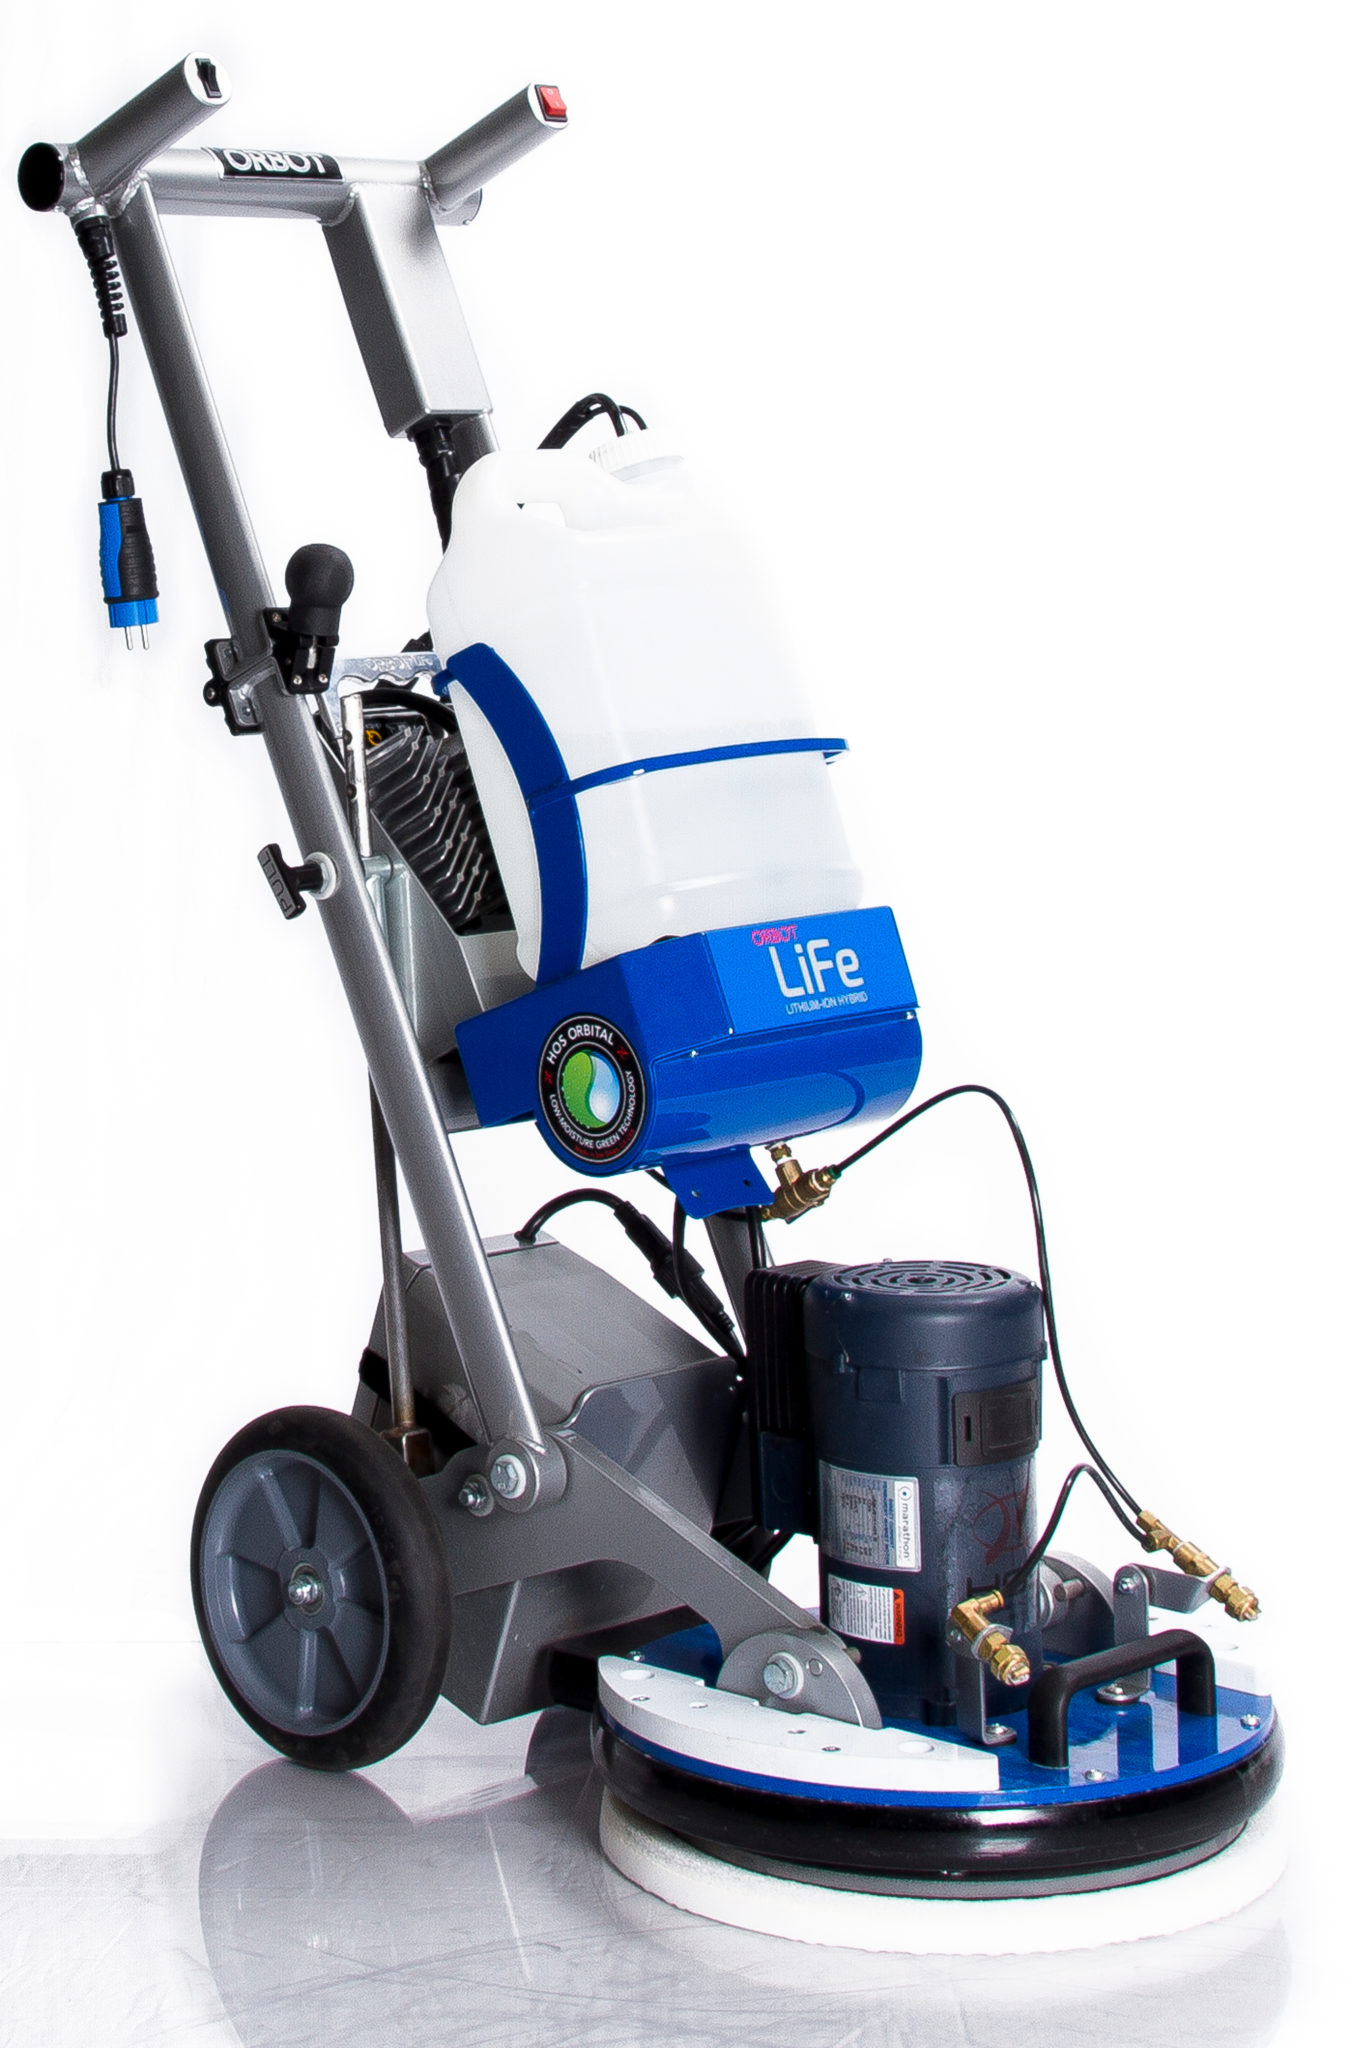 Delta-Q Technologies Announces Lithium Charger Supply to ORBOT LiFe Floor Machines